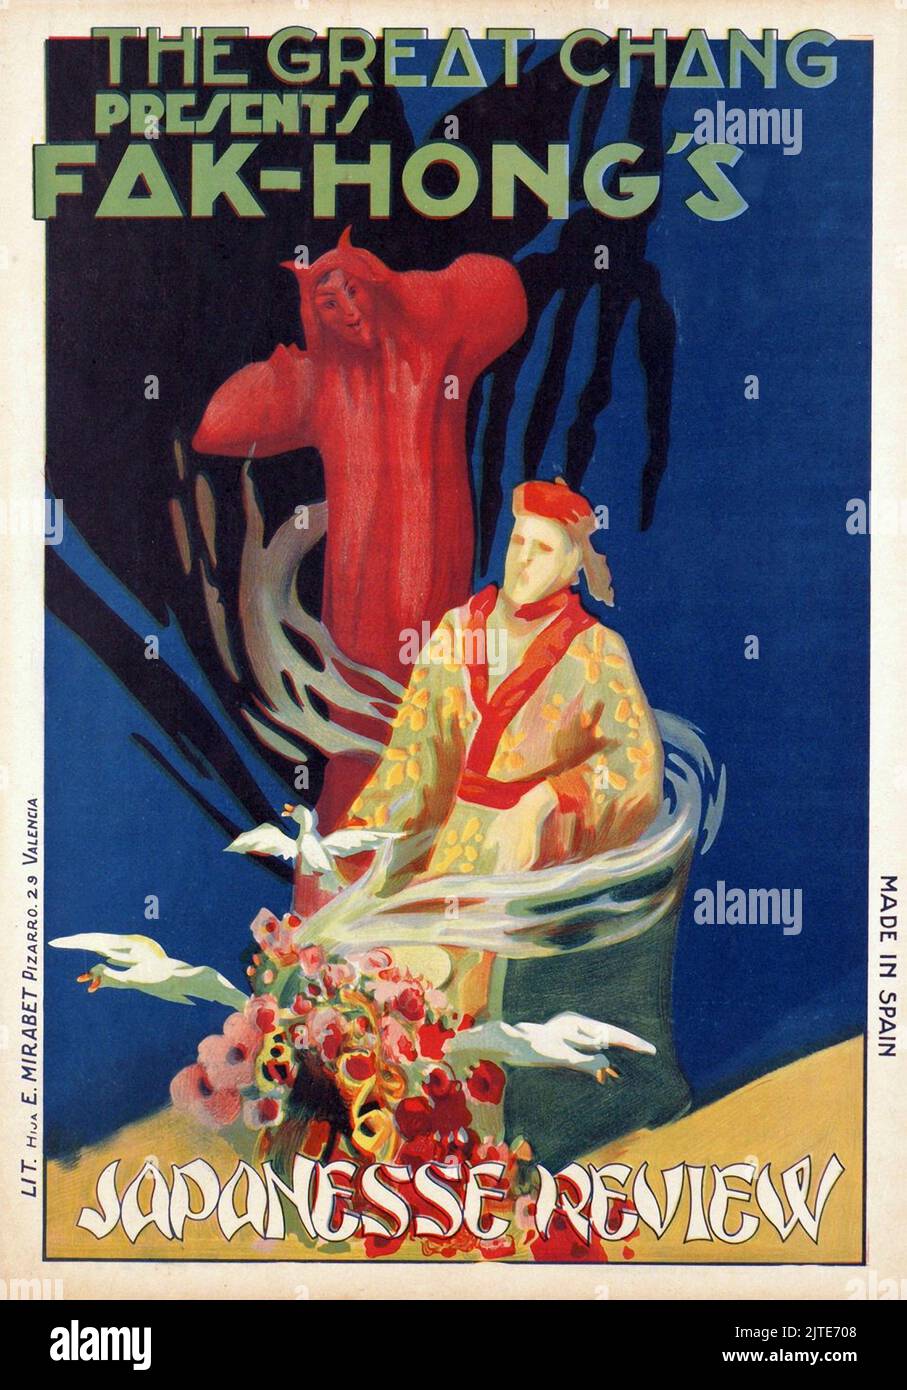 Vintage 1920s Magic Poster for THE GREAT CHANG PRESENTS FAK-HONG'S Japanese Review. Stock Photo